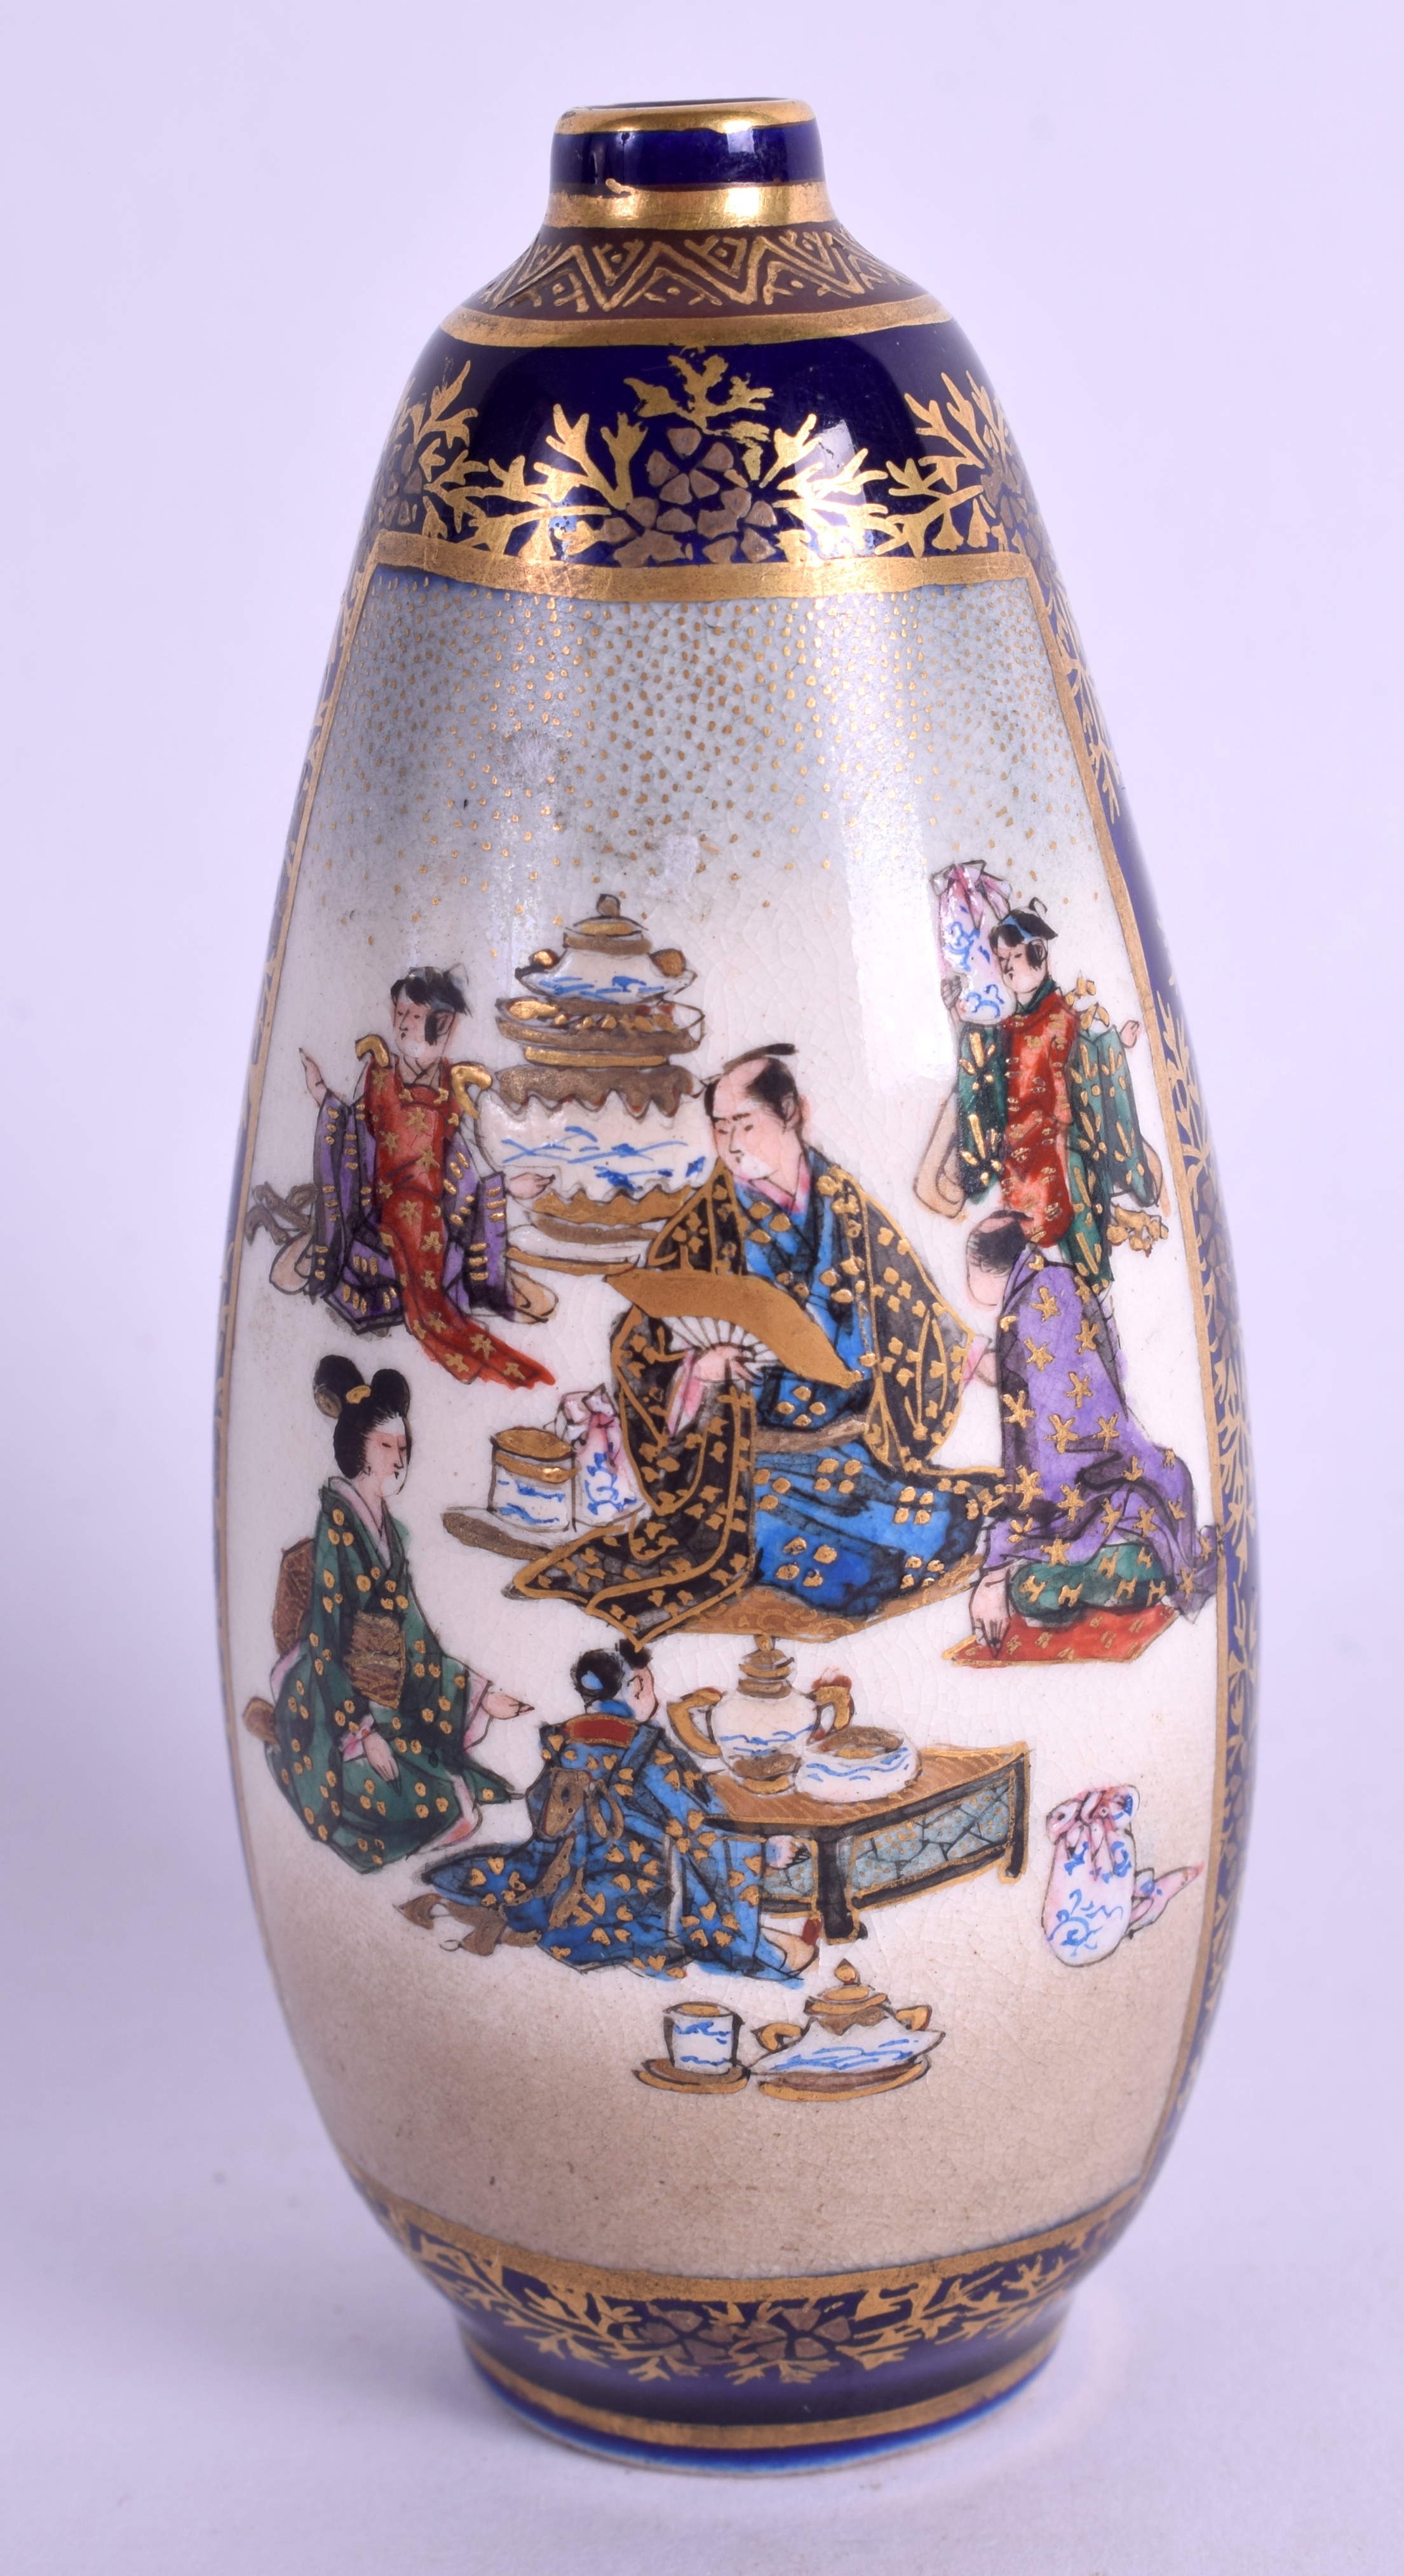 A FINE 19TH CENTURY JAPANESE MEIJI PERIOD SATSUMA CONICAL VASE painted with figures within landscap